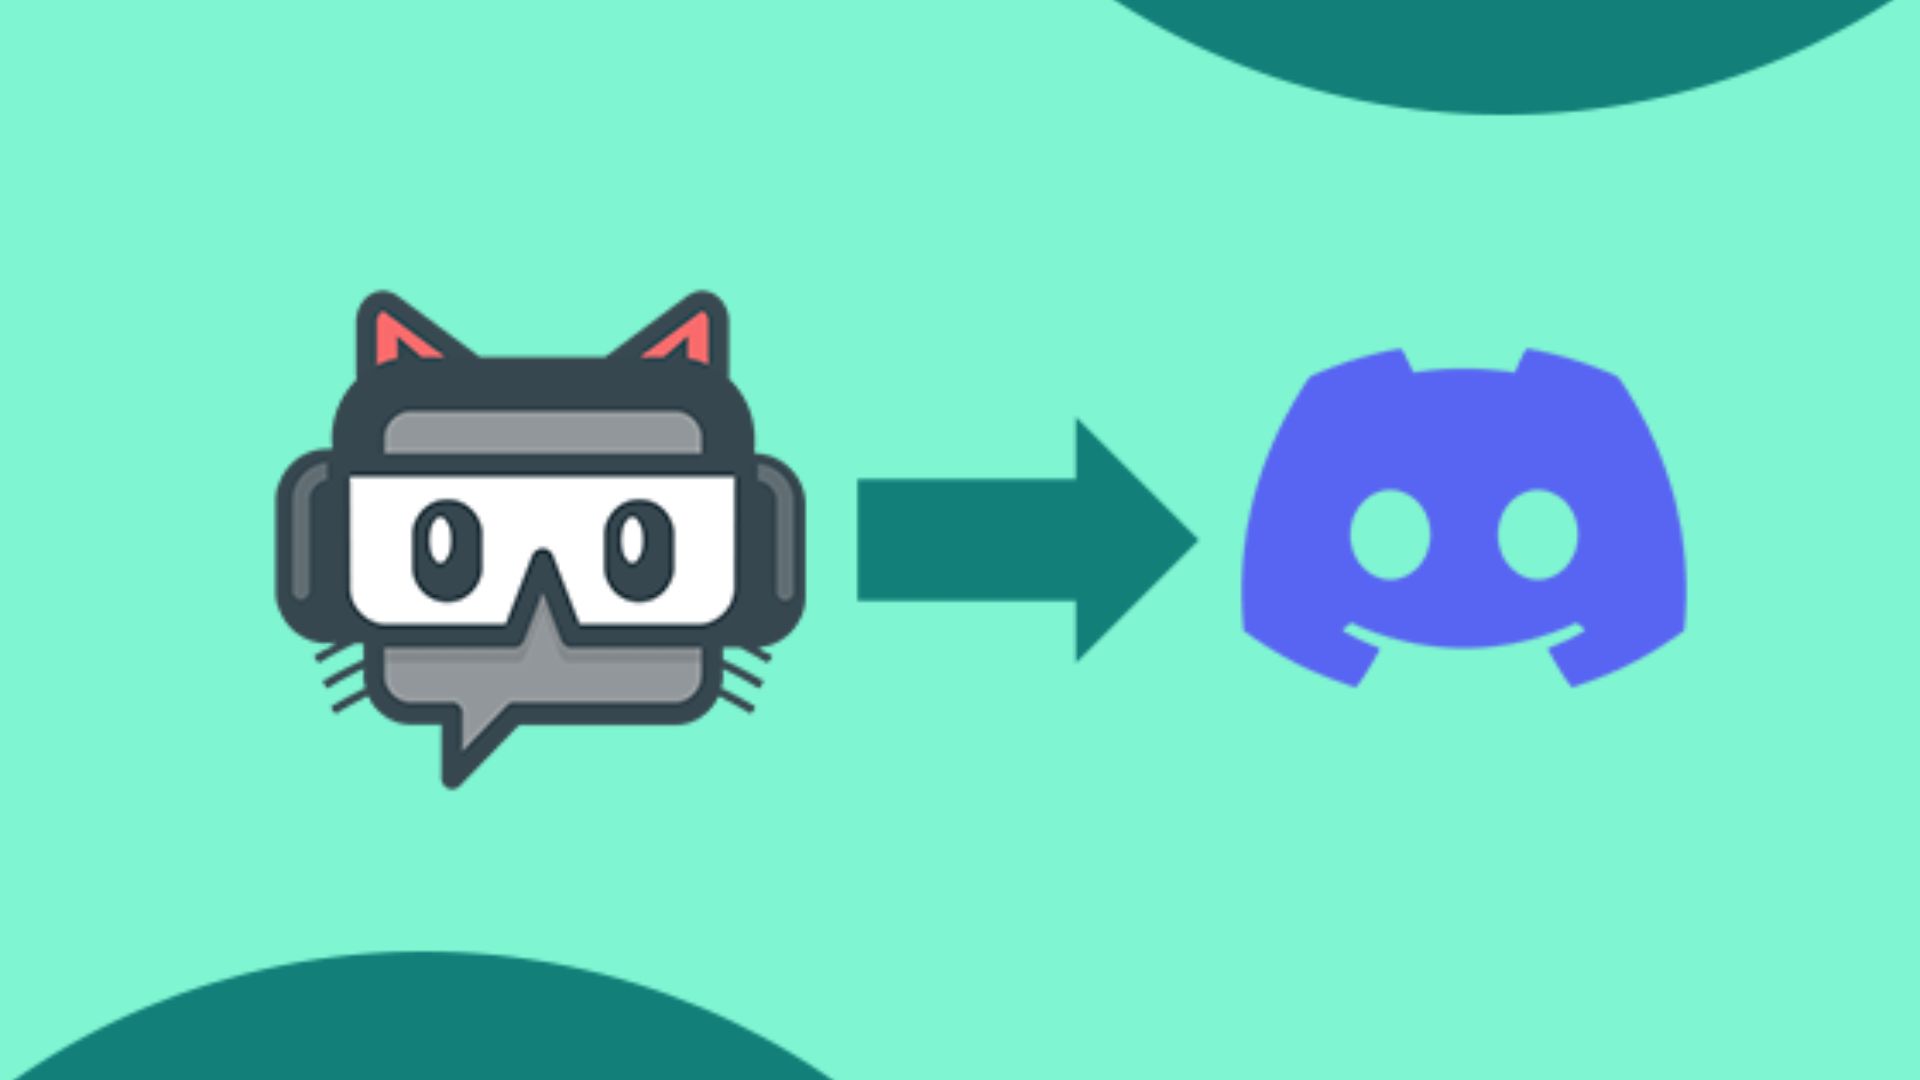 Streamlabs Chatbot Discord - How To Set Up Song Requests?